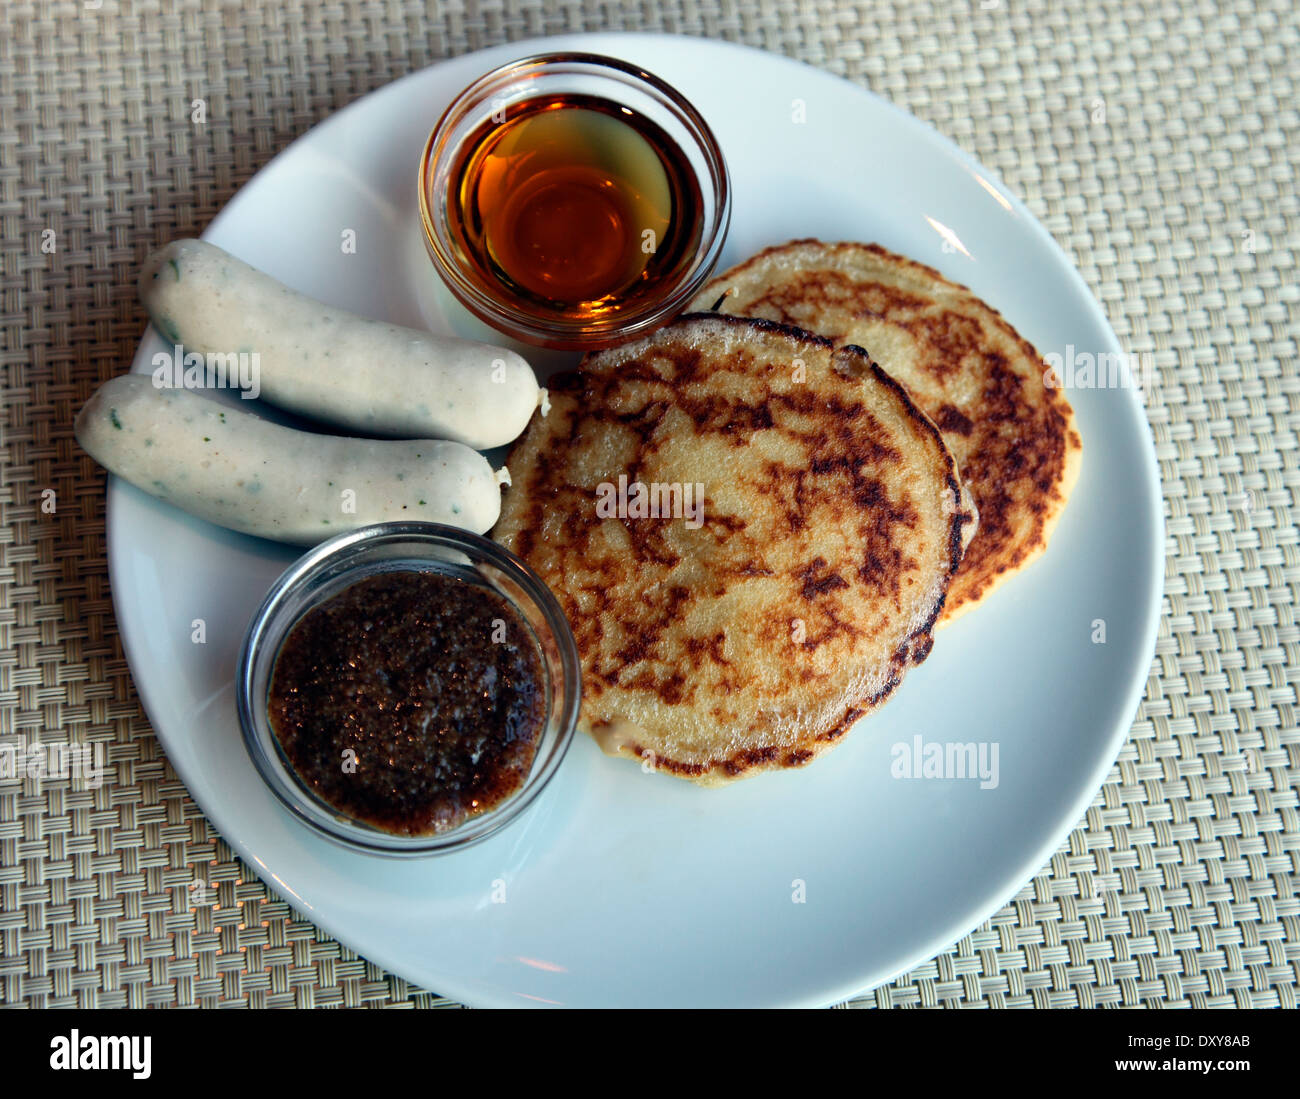 Bavarian breakfast of veal sausage, pancakes and syrup Stock Photo